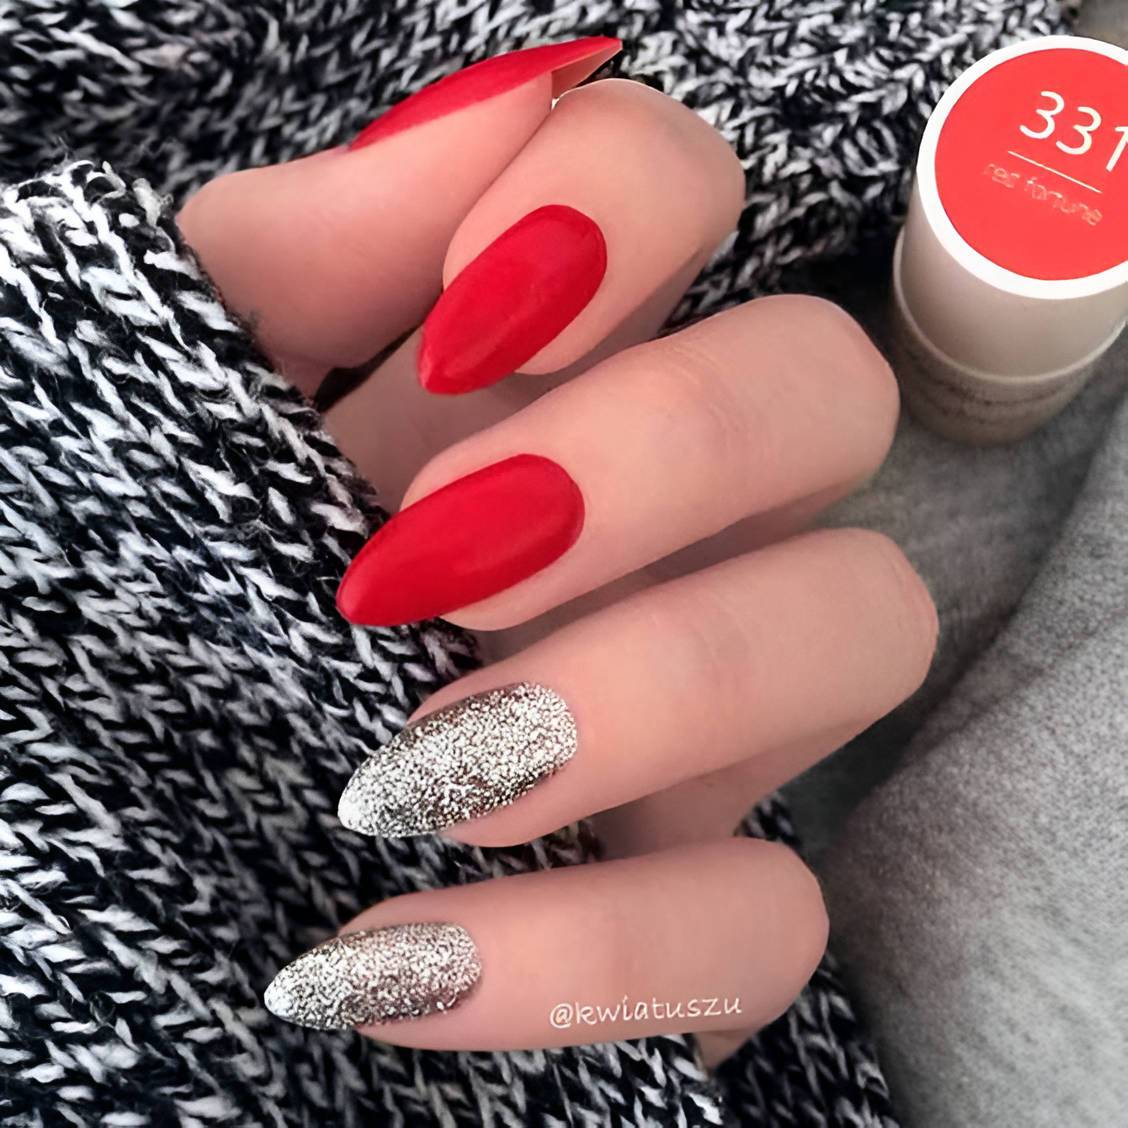 27 Glamorous Red Manicures To Make You Irresistible - 201